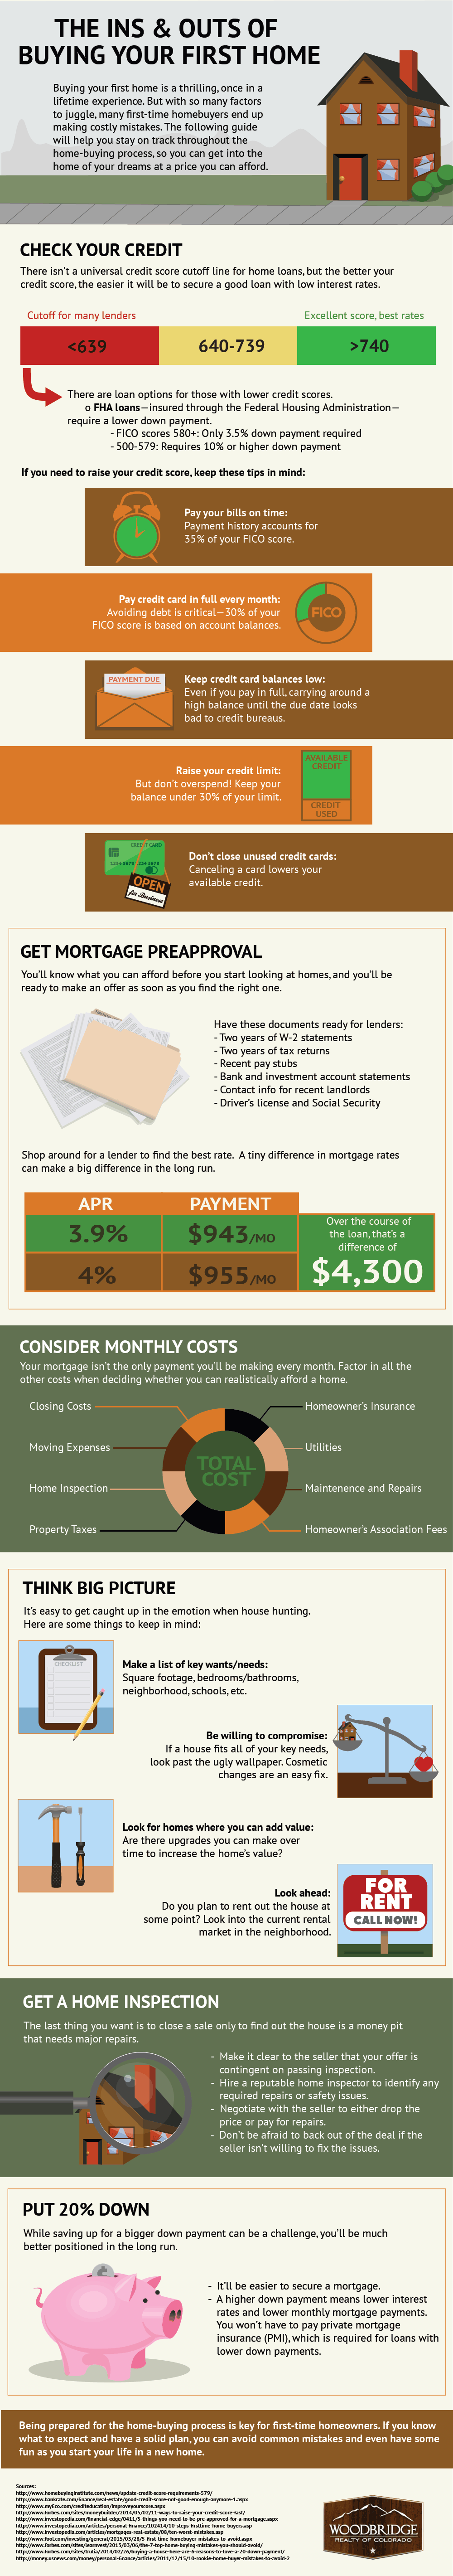 infographic_buying_first_home